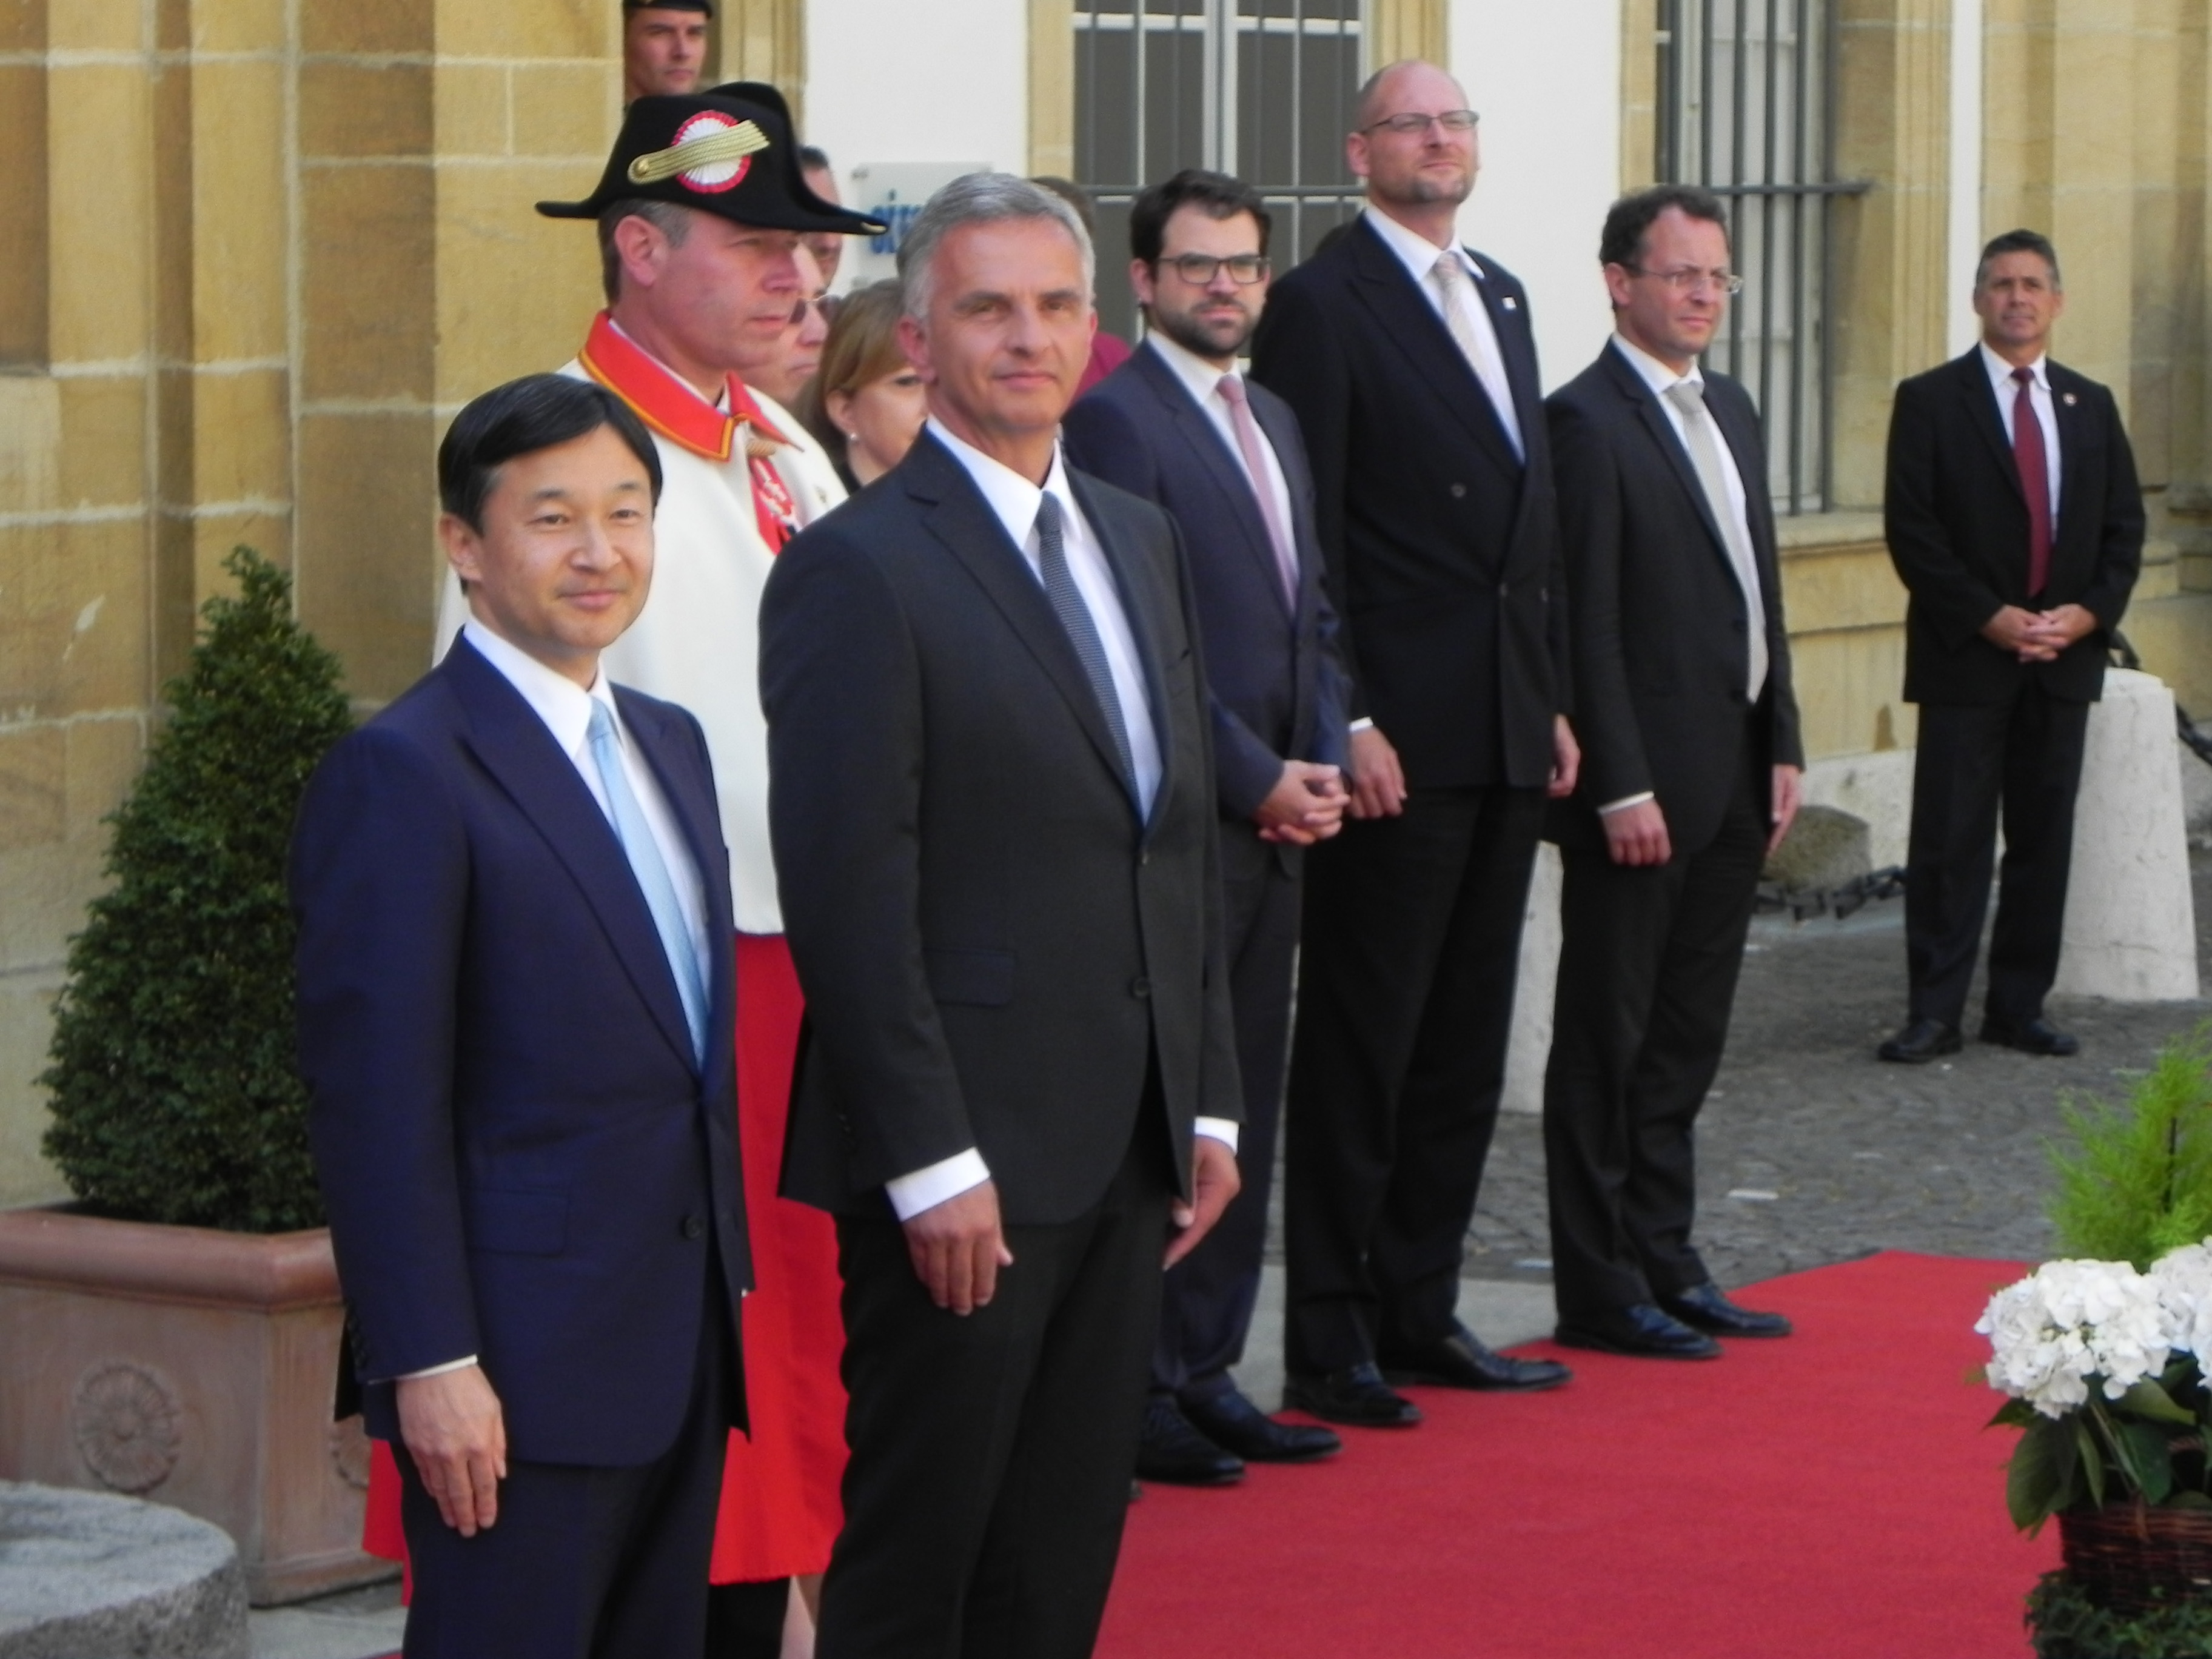 President of the Swiss Confederation Didier Burkhalter received Crown Prince Naruhito of Japan in Neuchâtel on Thursday, June 19